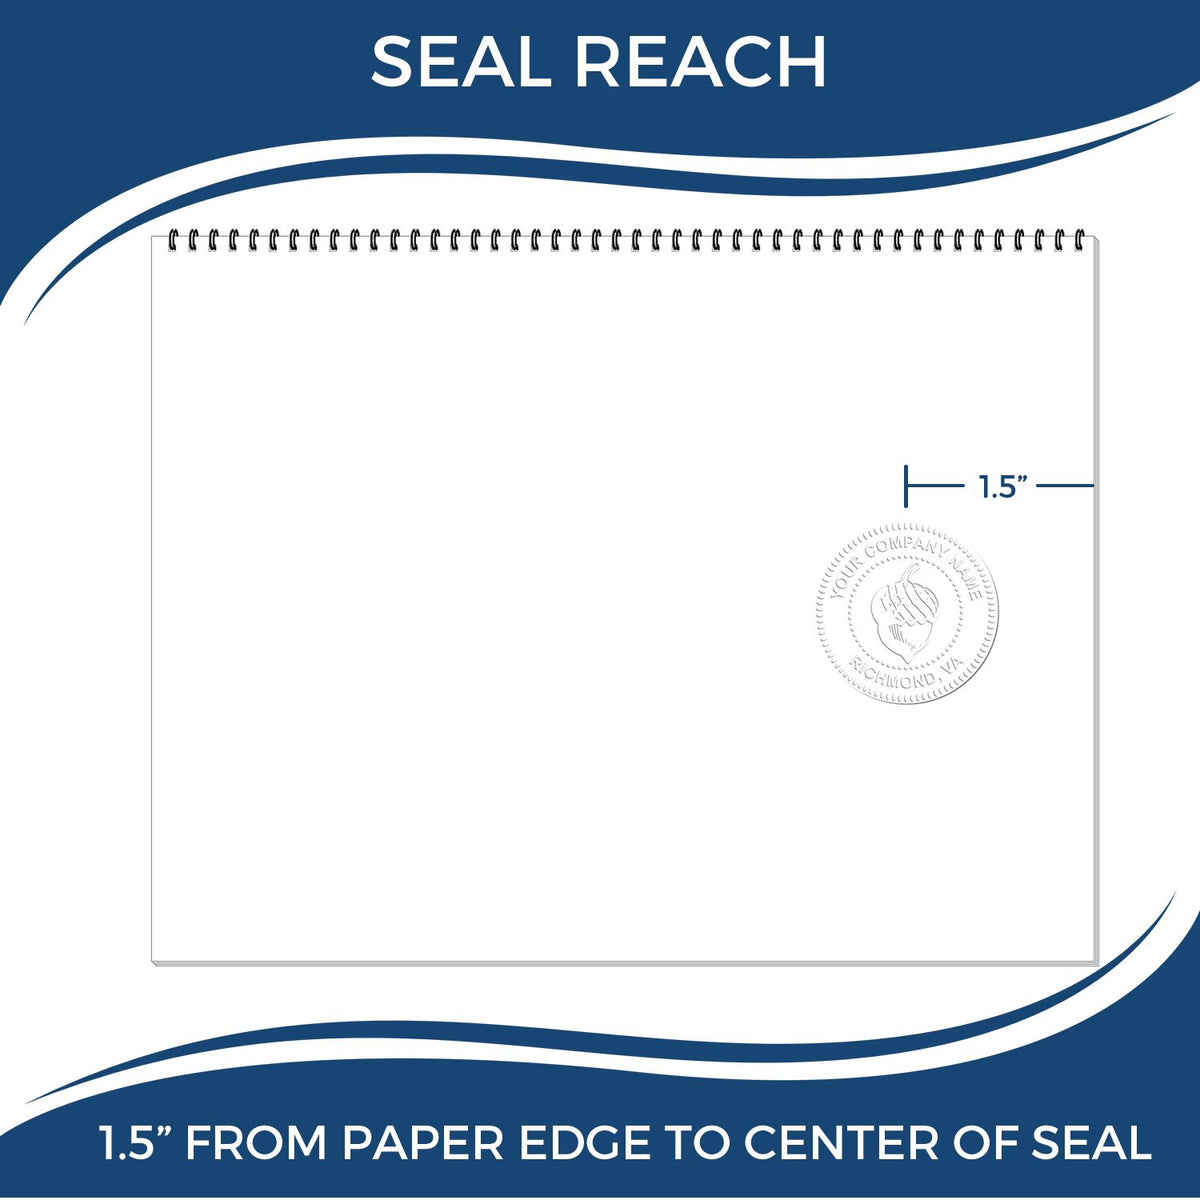 An infographic showing the seal reach which is represented by a ruler and a miniature seal image of the Gift Louisiana Landscape Architect Seal